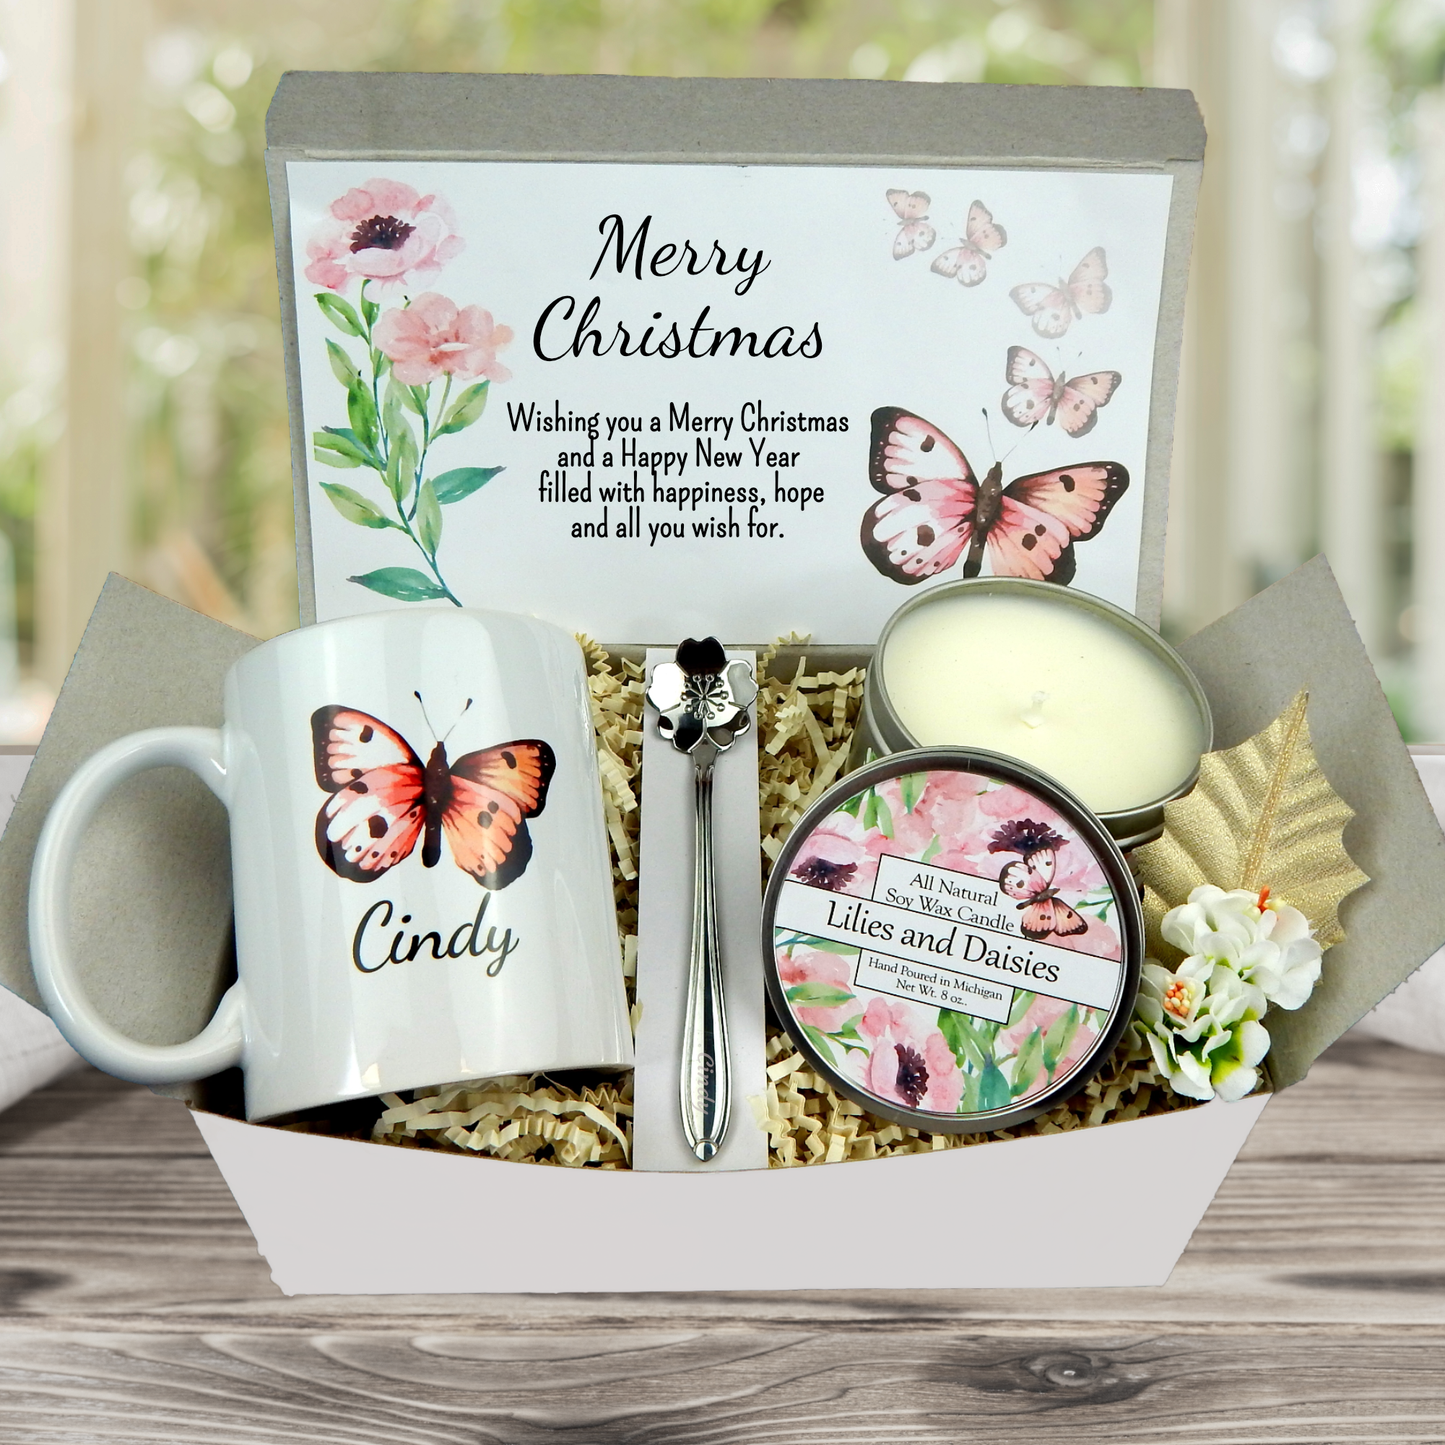 Christmas Gift Box with Personalized Coffee Mug and Heartfelt Message